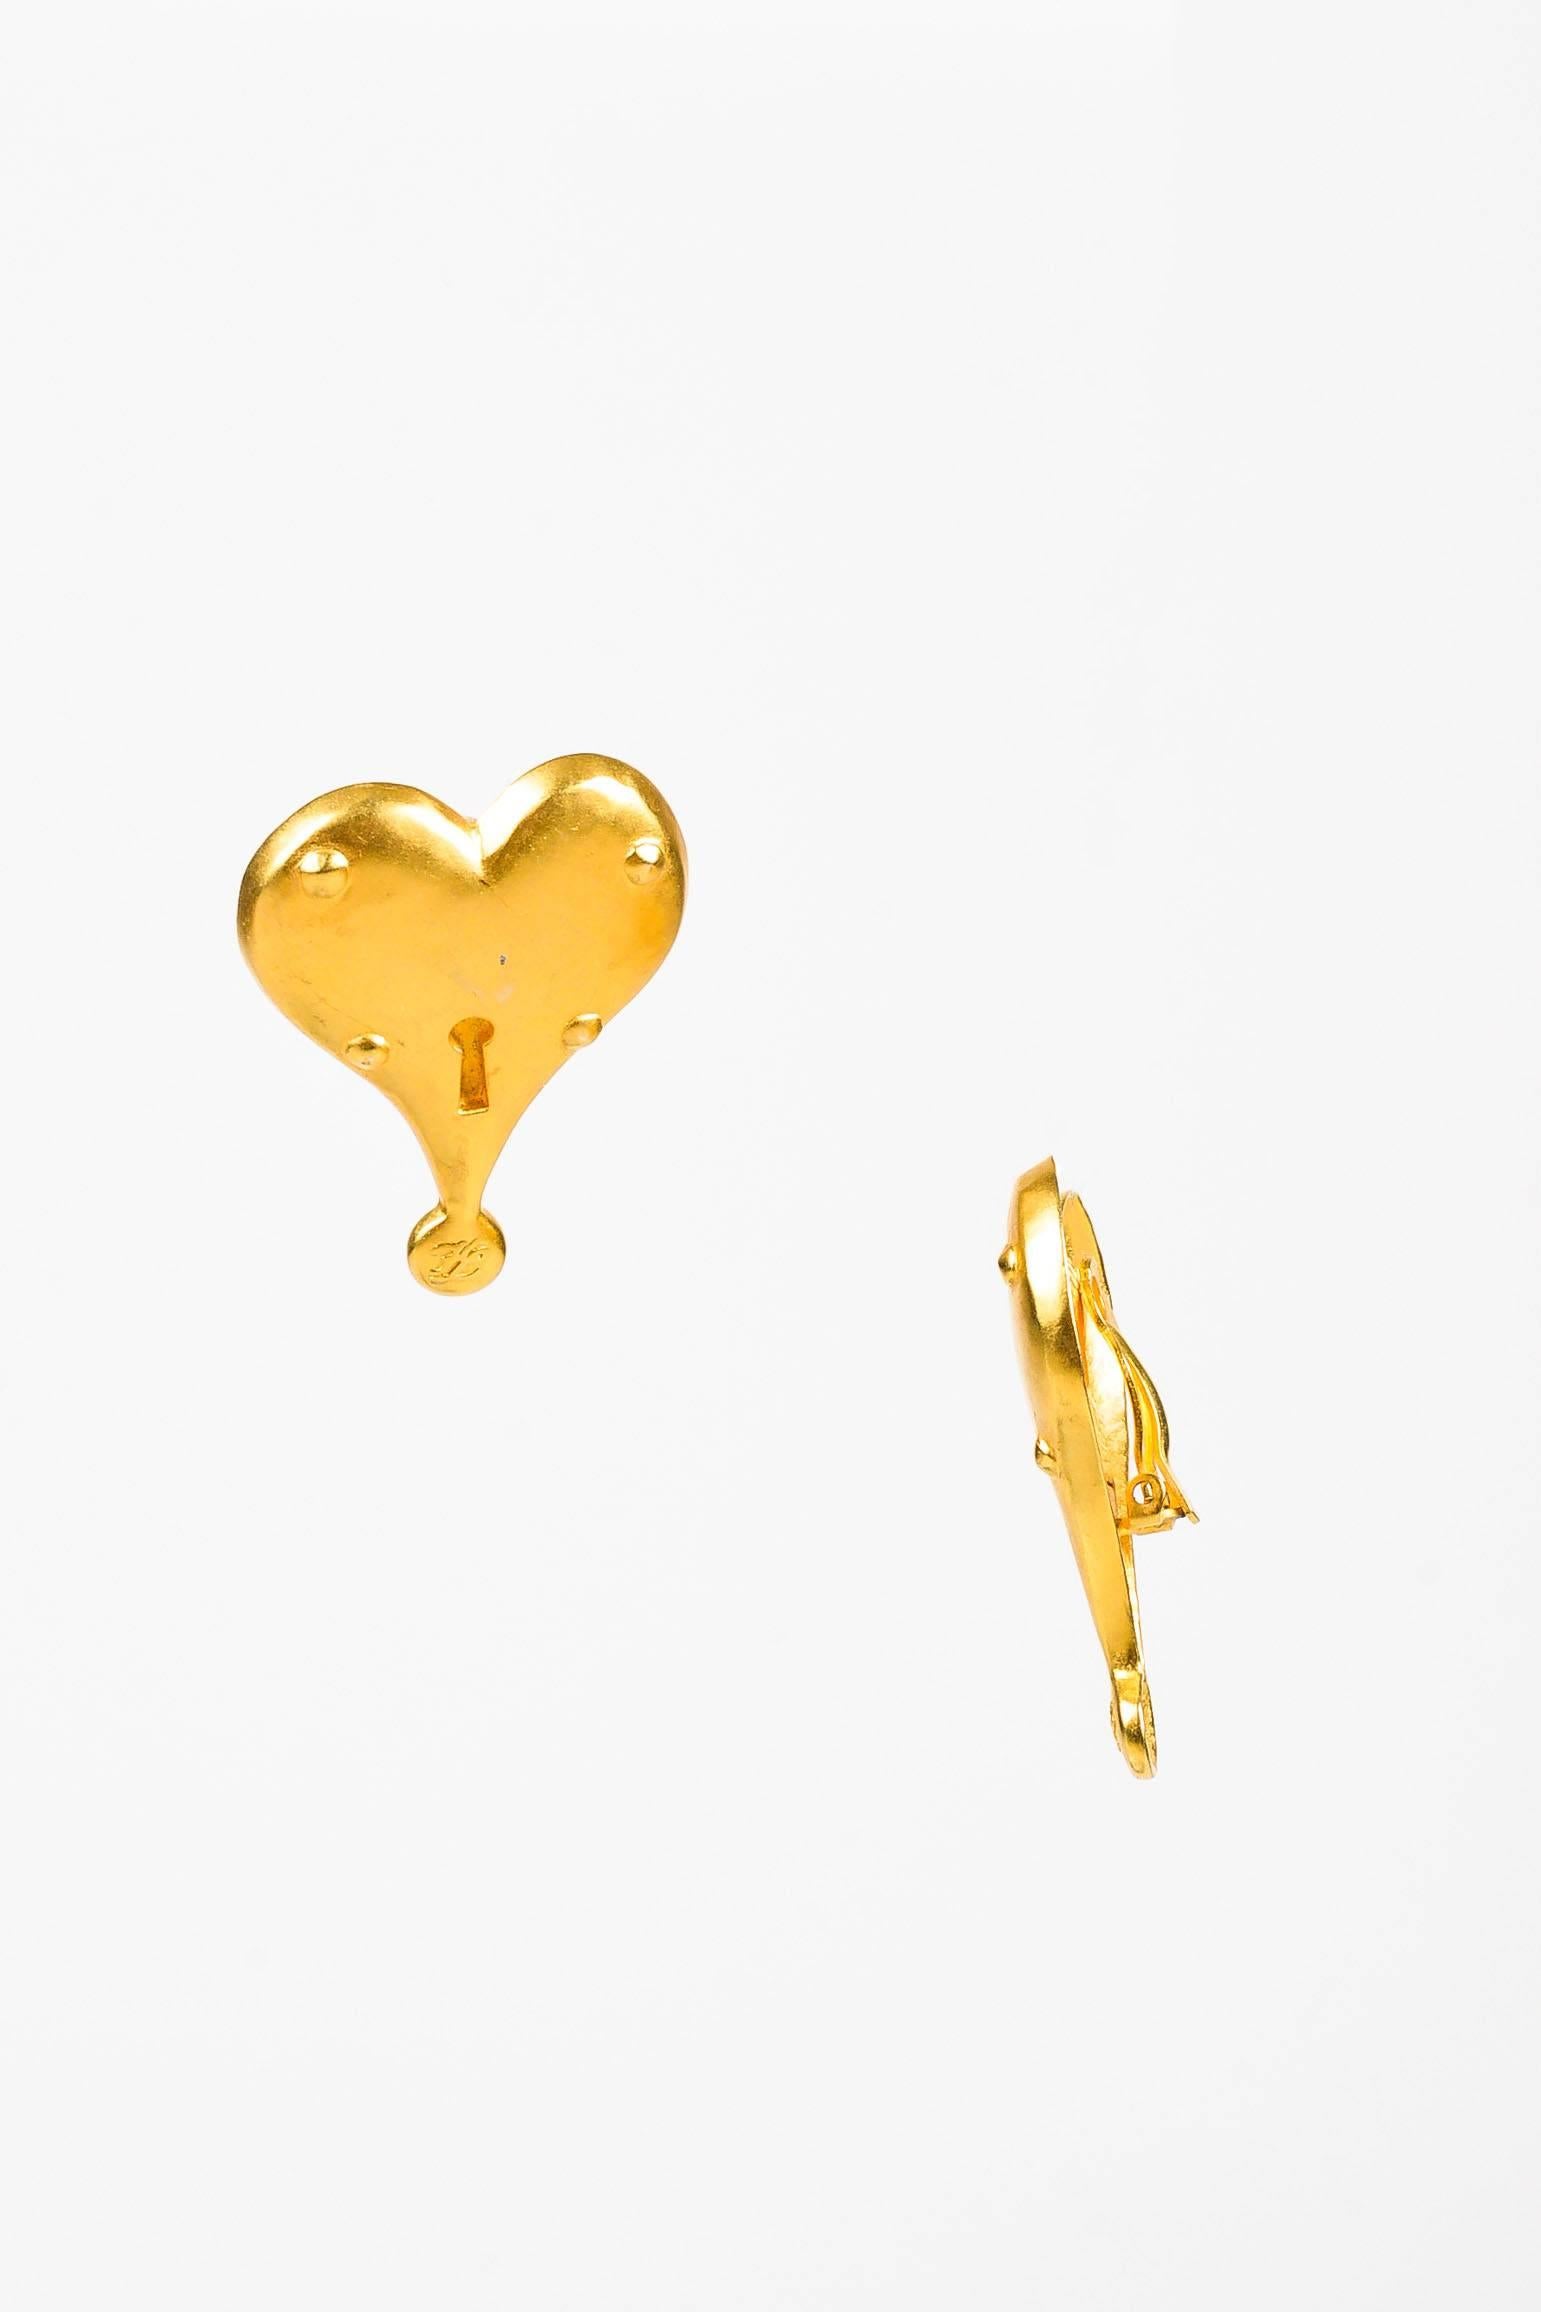 Vintage statement earrings by Karl Lagerfeld. Large matte gold-tone hearts with key hole centers. Clip on backs.

Measurements: Total Height 1.875